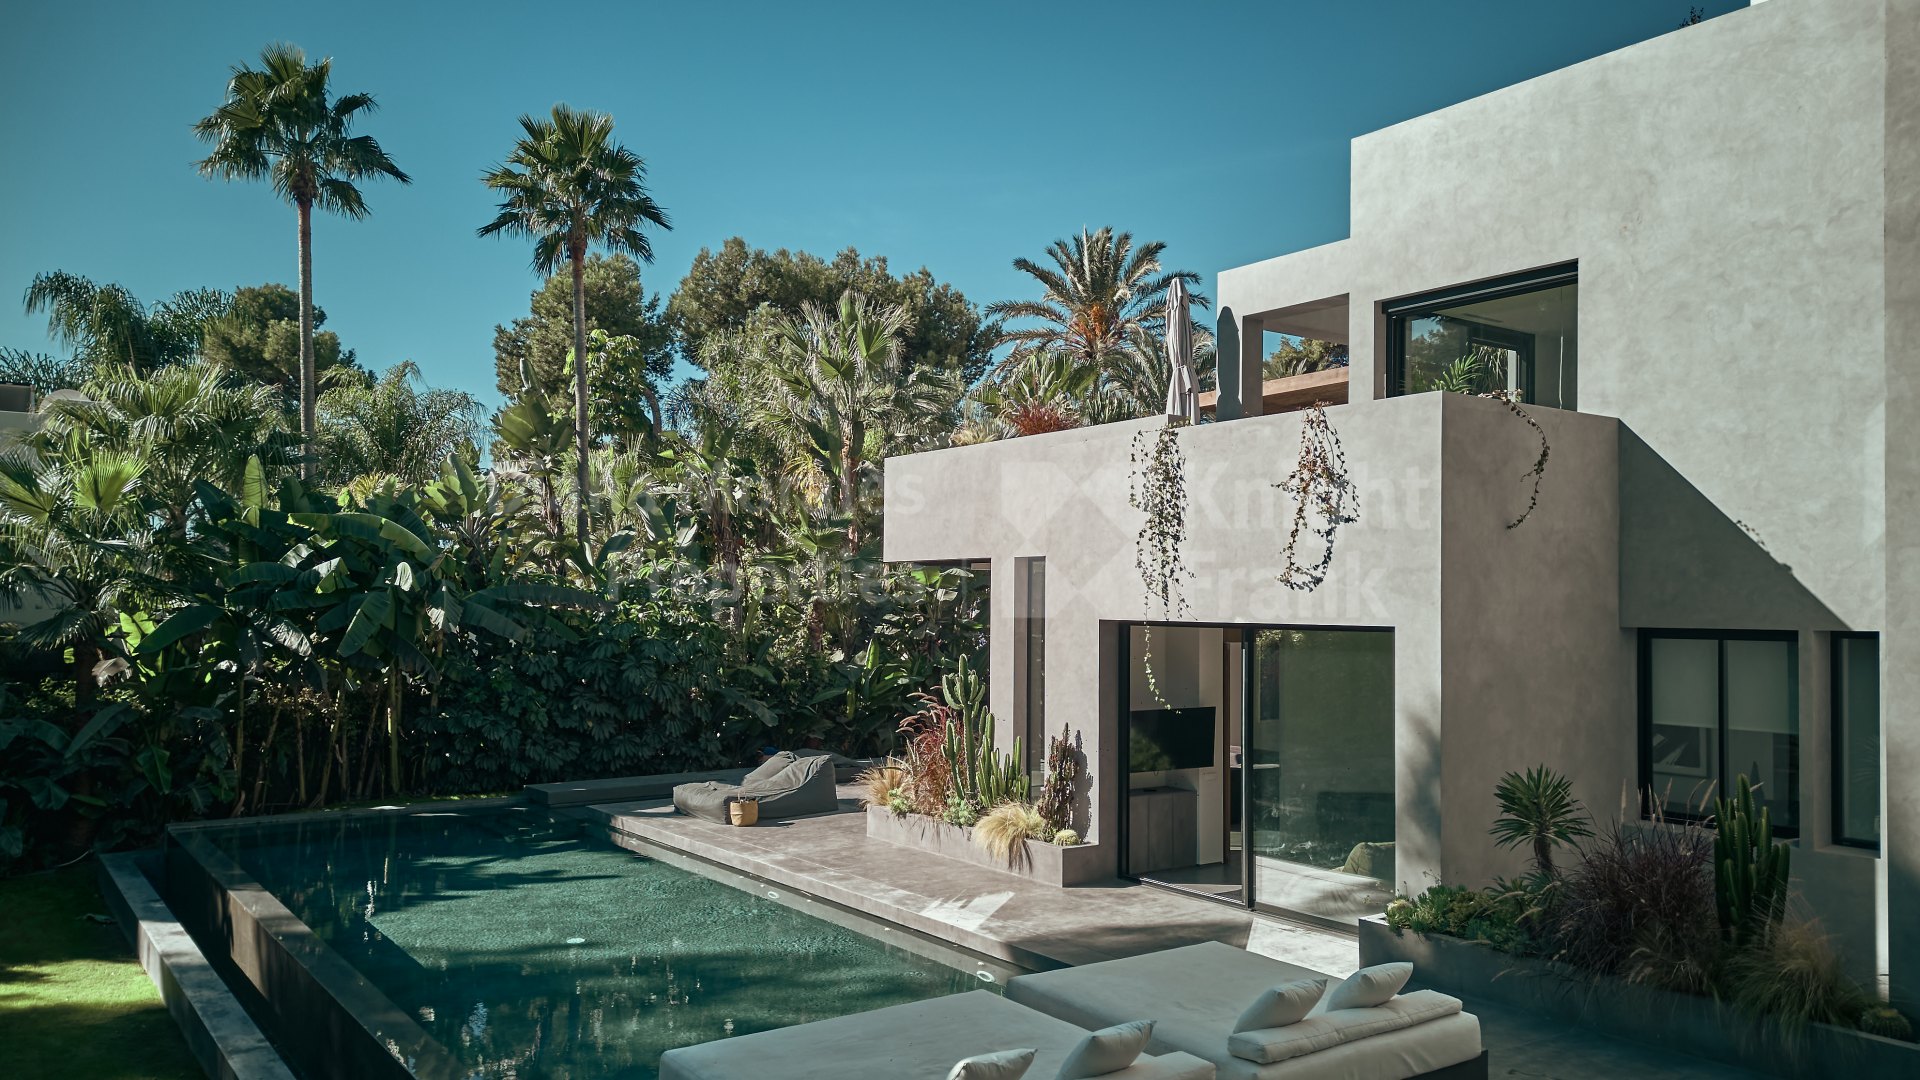 Los Monteros, Luxury villa with renowned architecture and design award